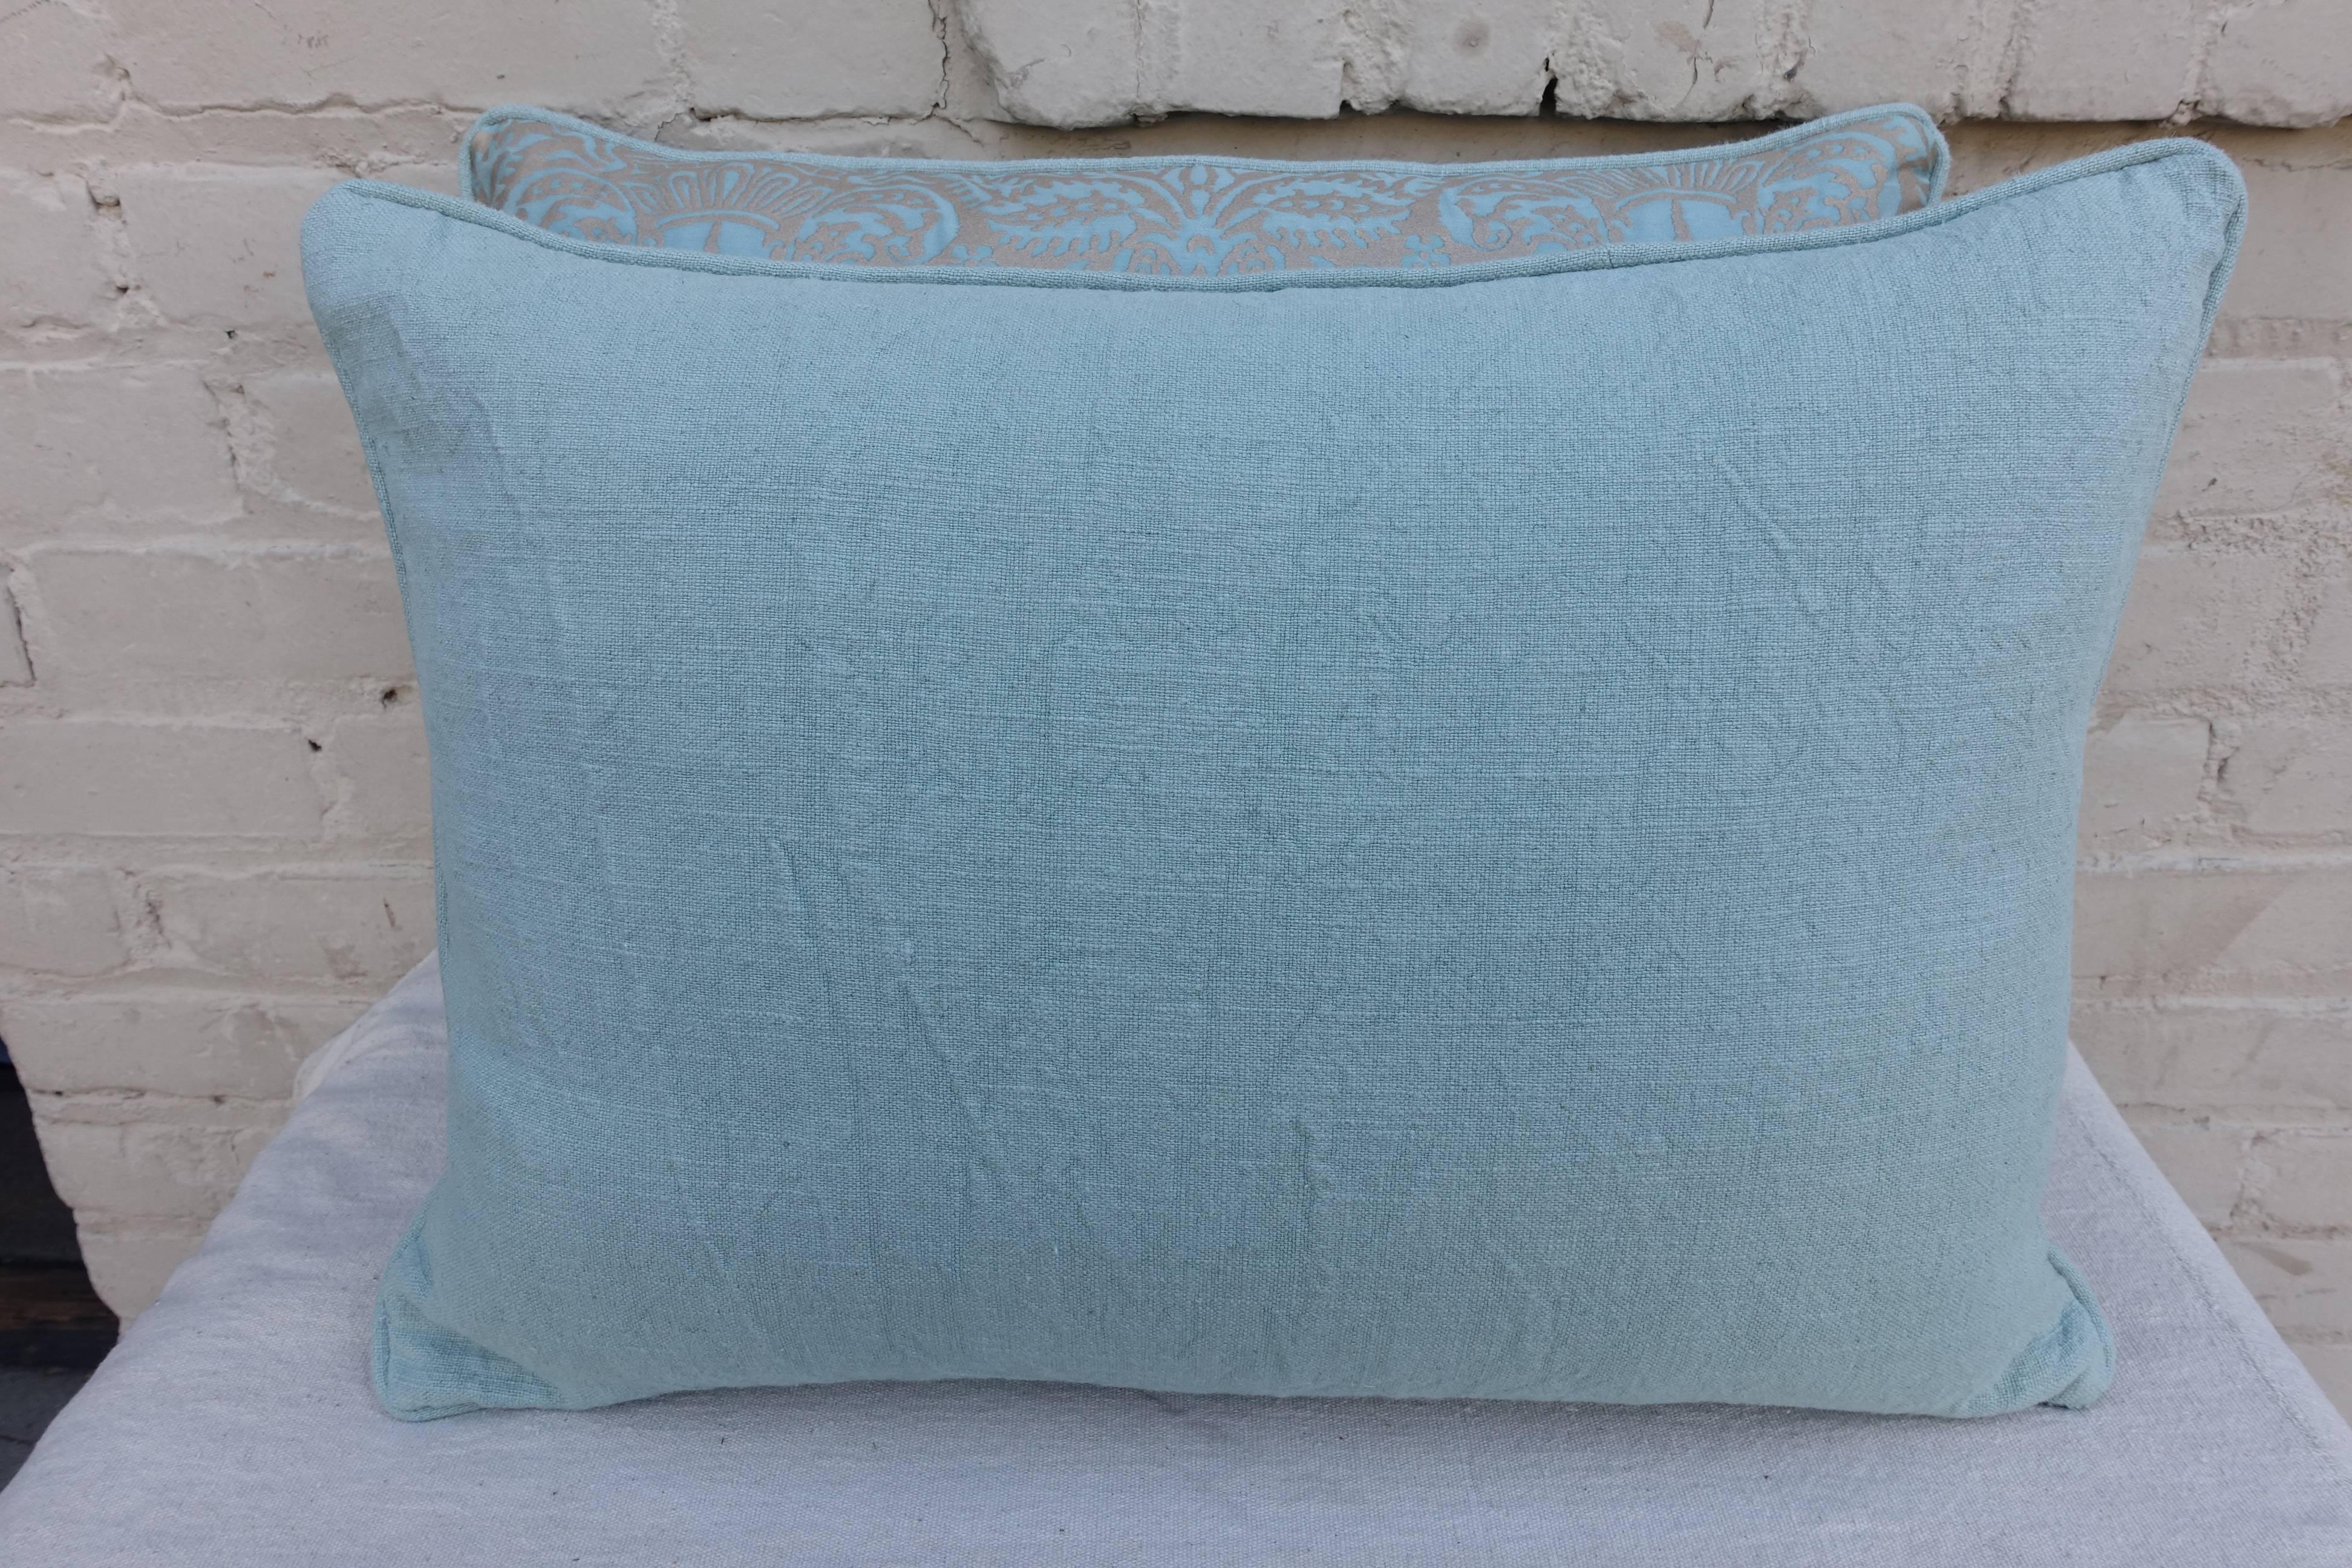 Pair of custom authentic aquamarine and metallic silvery gold Fortuny textile pillows. Soft blue linen backs. Down inserts.